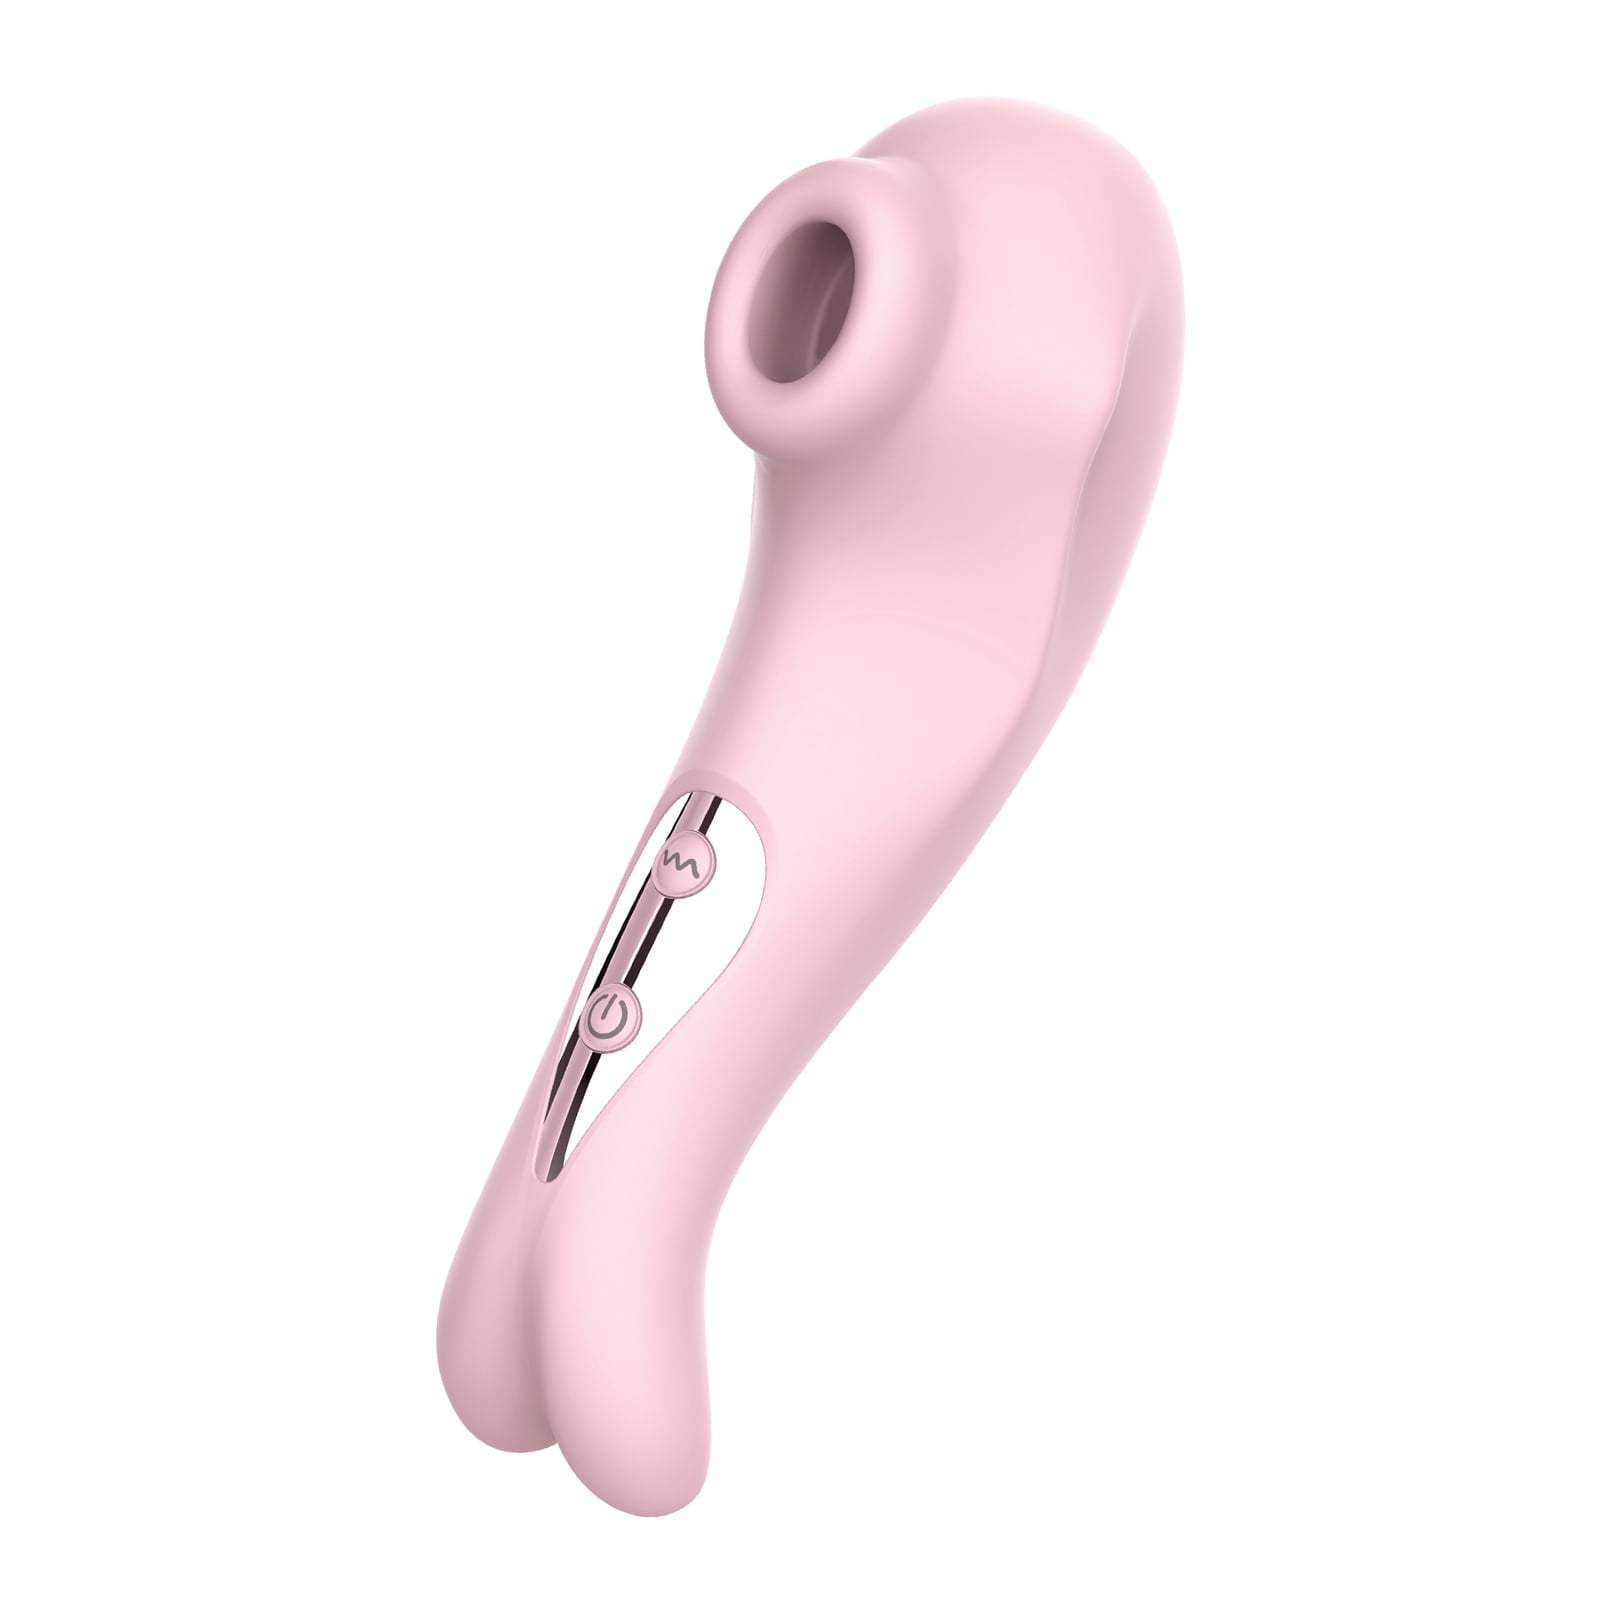 Tracy's Dog Clitoral Sucking Vibrator for Clit Nipple Stimulation, Clitoris  Stimulator with 7 Modes, Adult Oral Sex Toys for Women Couples(Mr. Duckie)